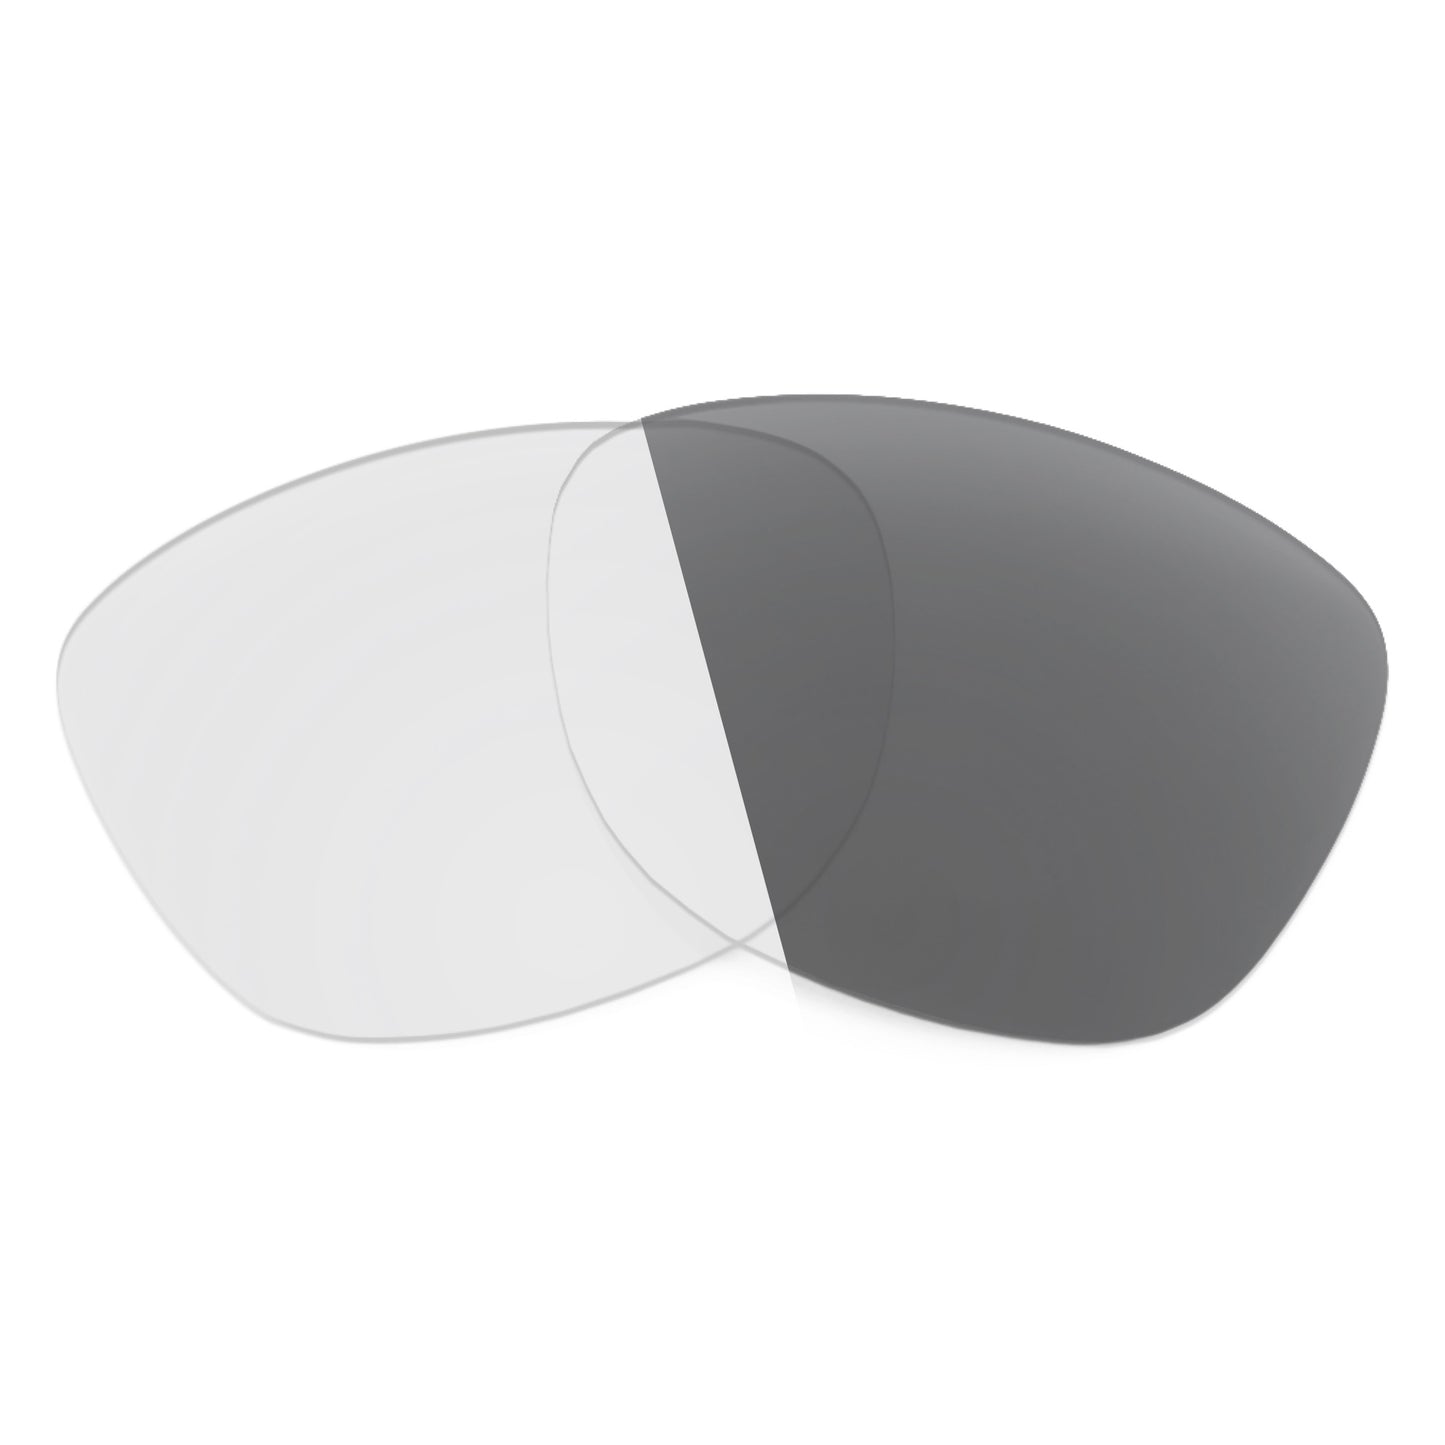 Revant replacement lenses for Ray-Ban Brad RB4170 58mm Non-Polarized Adapt Gray Photochromic